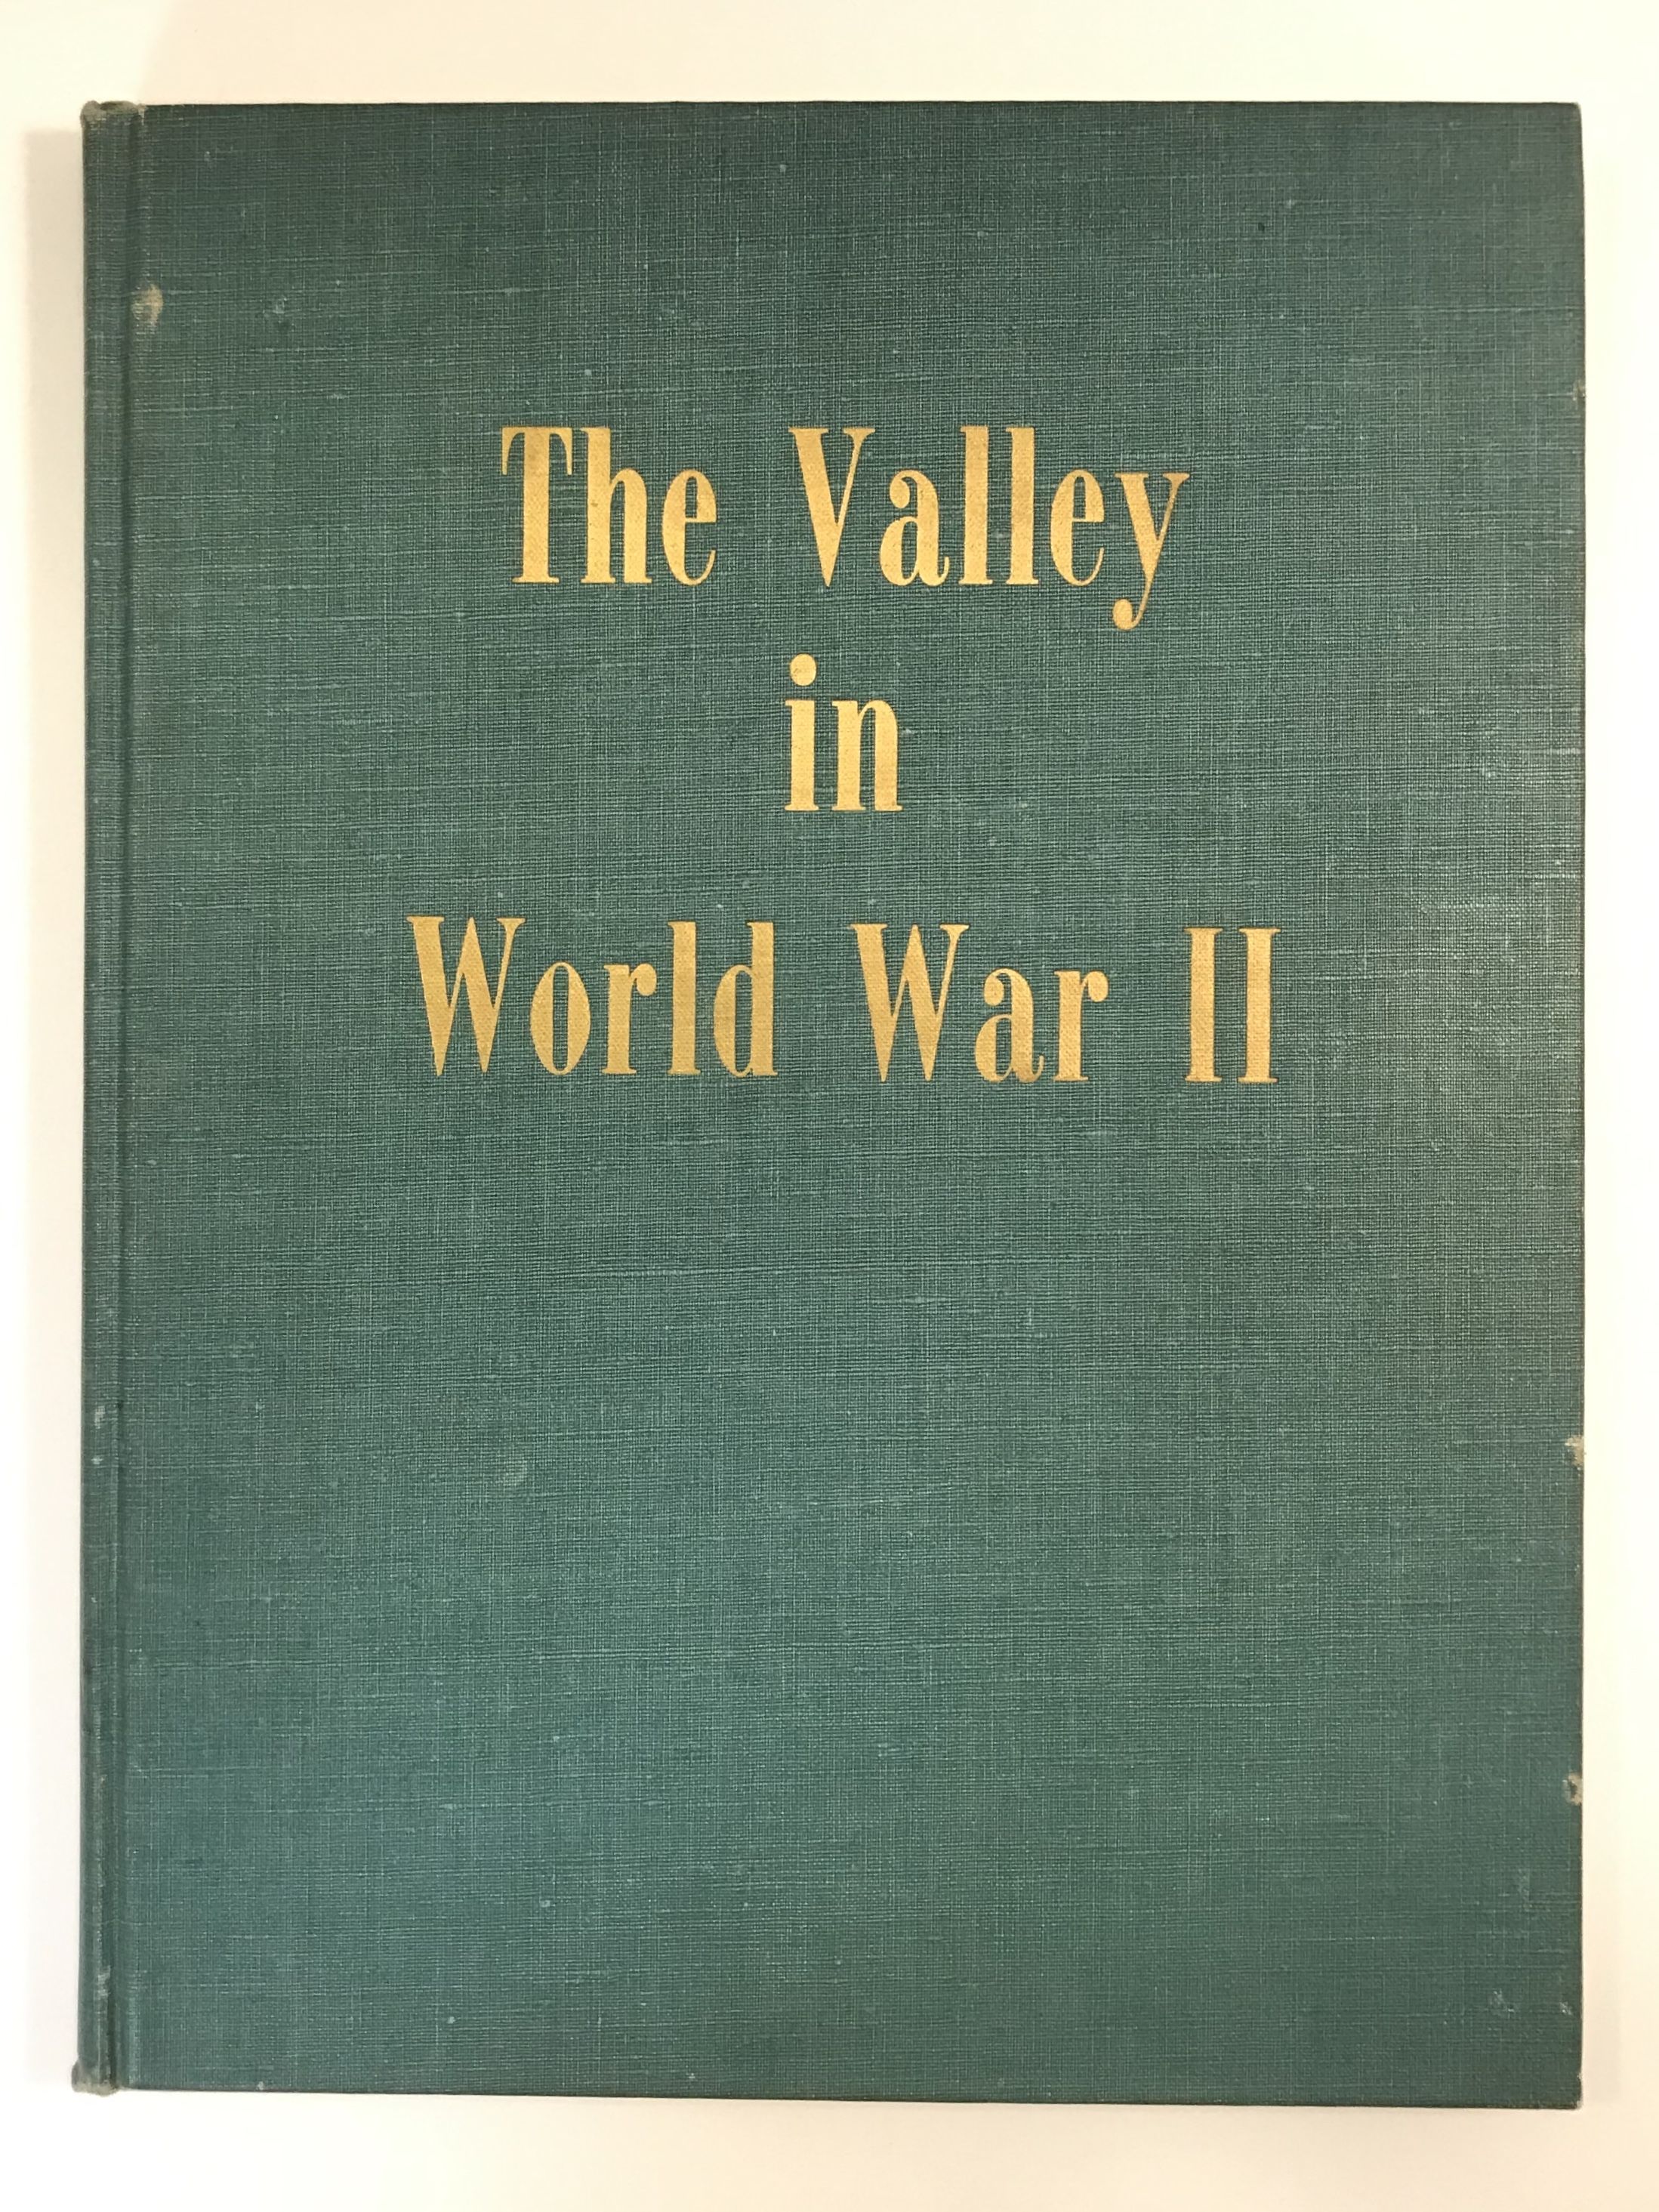 the-valley-in-world-war-ii-1941-1945-very-good-hardcover-1947-first-edition-old-new-york